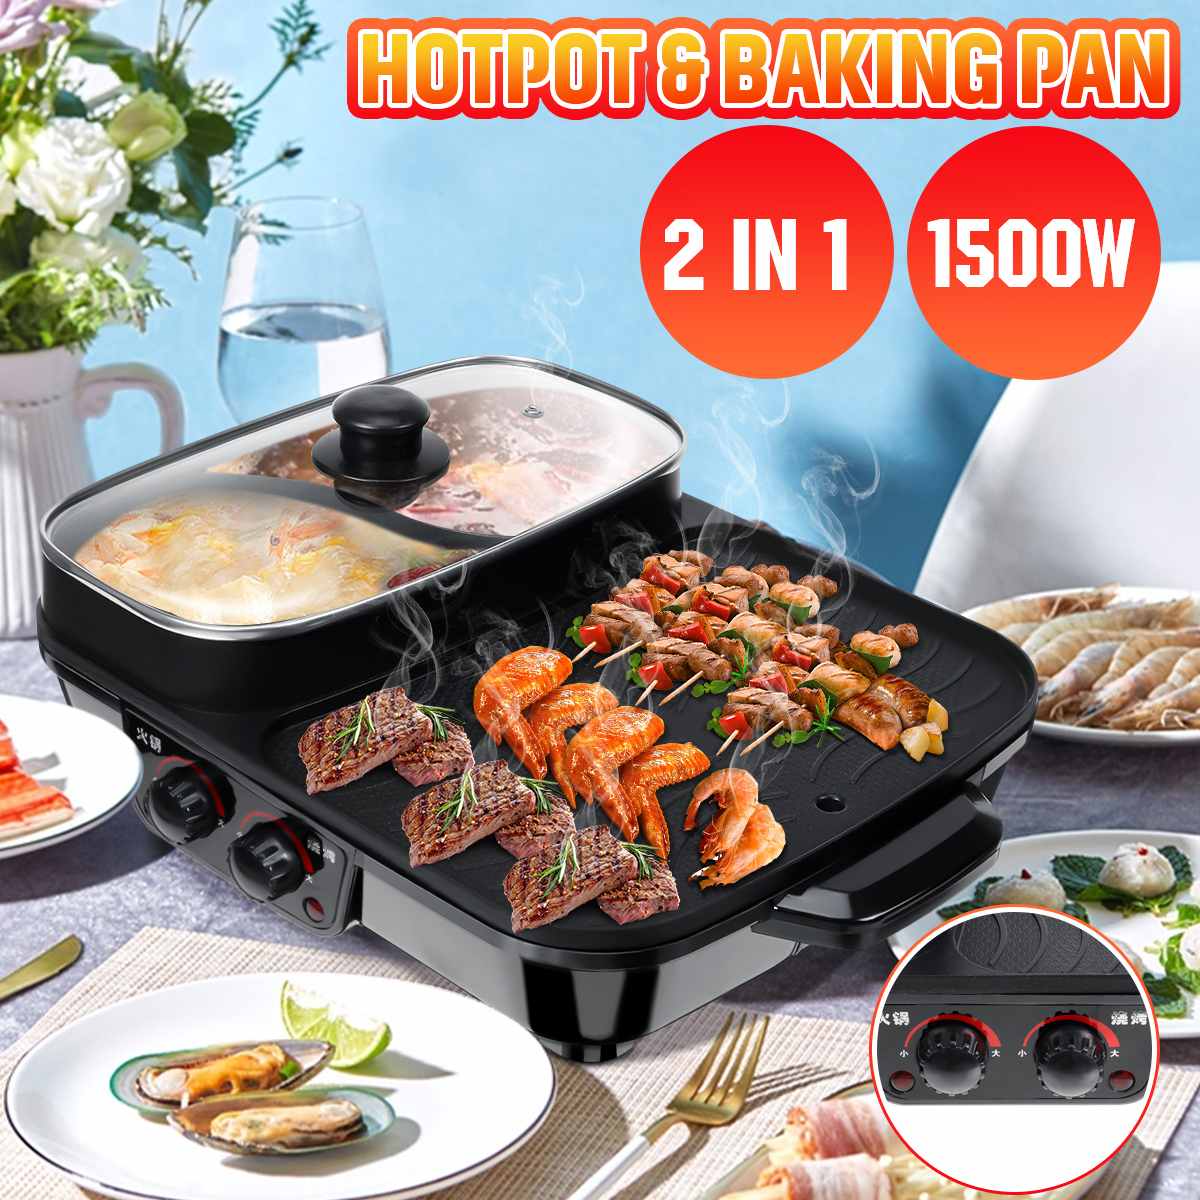 1500W 220V Electric Griddles Electric Grill & Hot Pot Non-stick Indoor Baking Flat Pan Home Smokeless Hotpot BBQ Griddle Plate